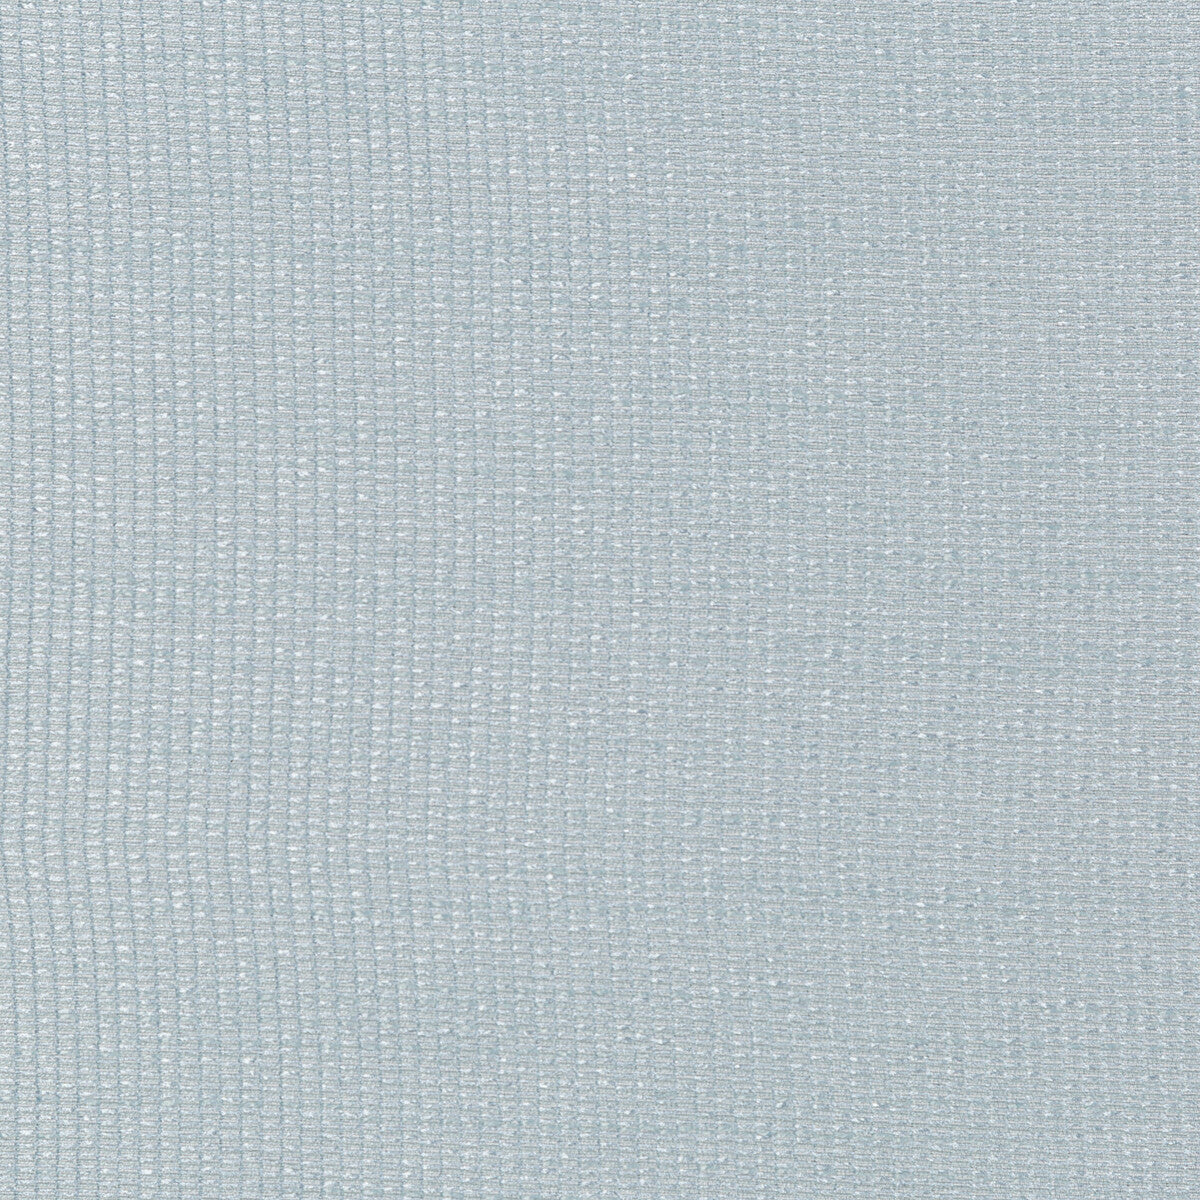 Hadley fabric in sail color - pattern 4652.15.0 - by Kravet Contract